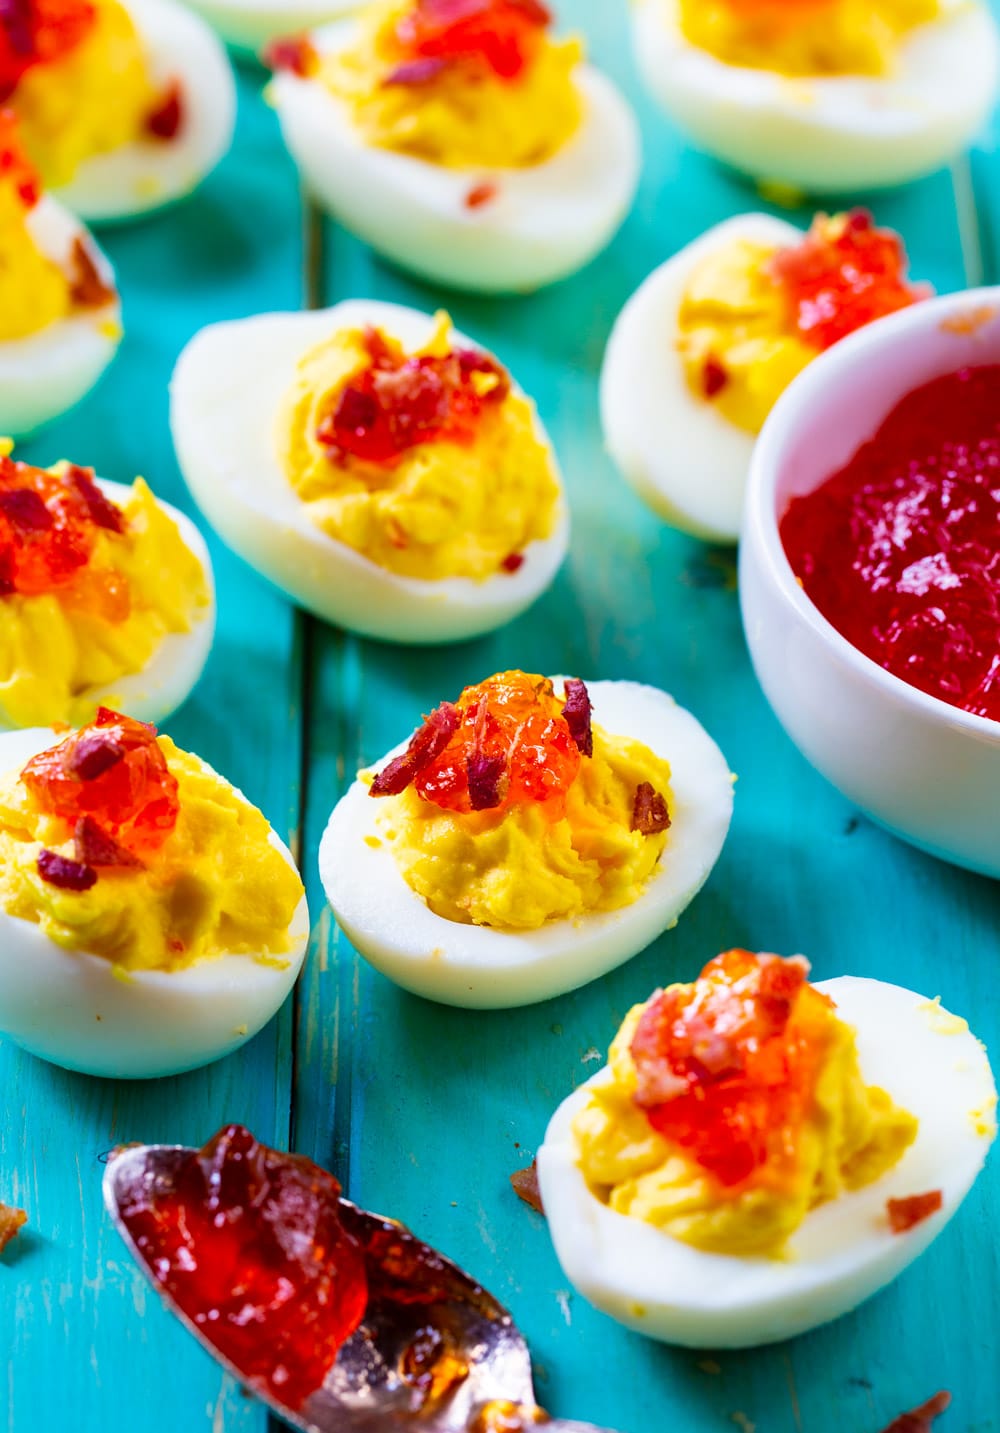 Deviled Eggs topped with Red Pepper Jelly on light blue background.